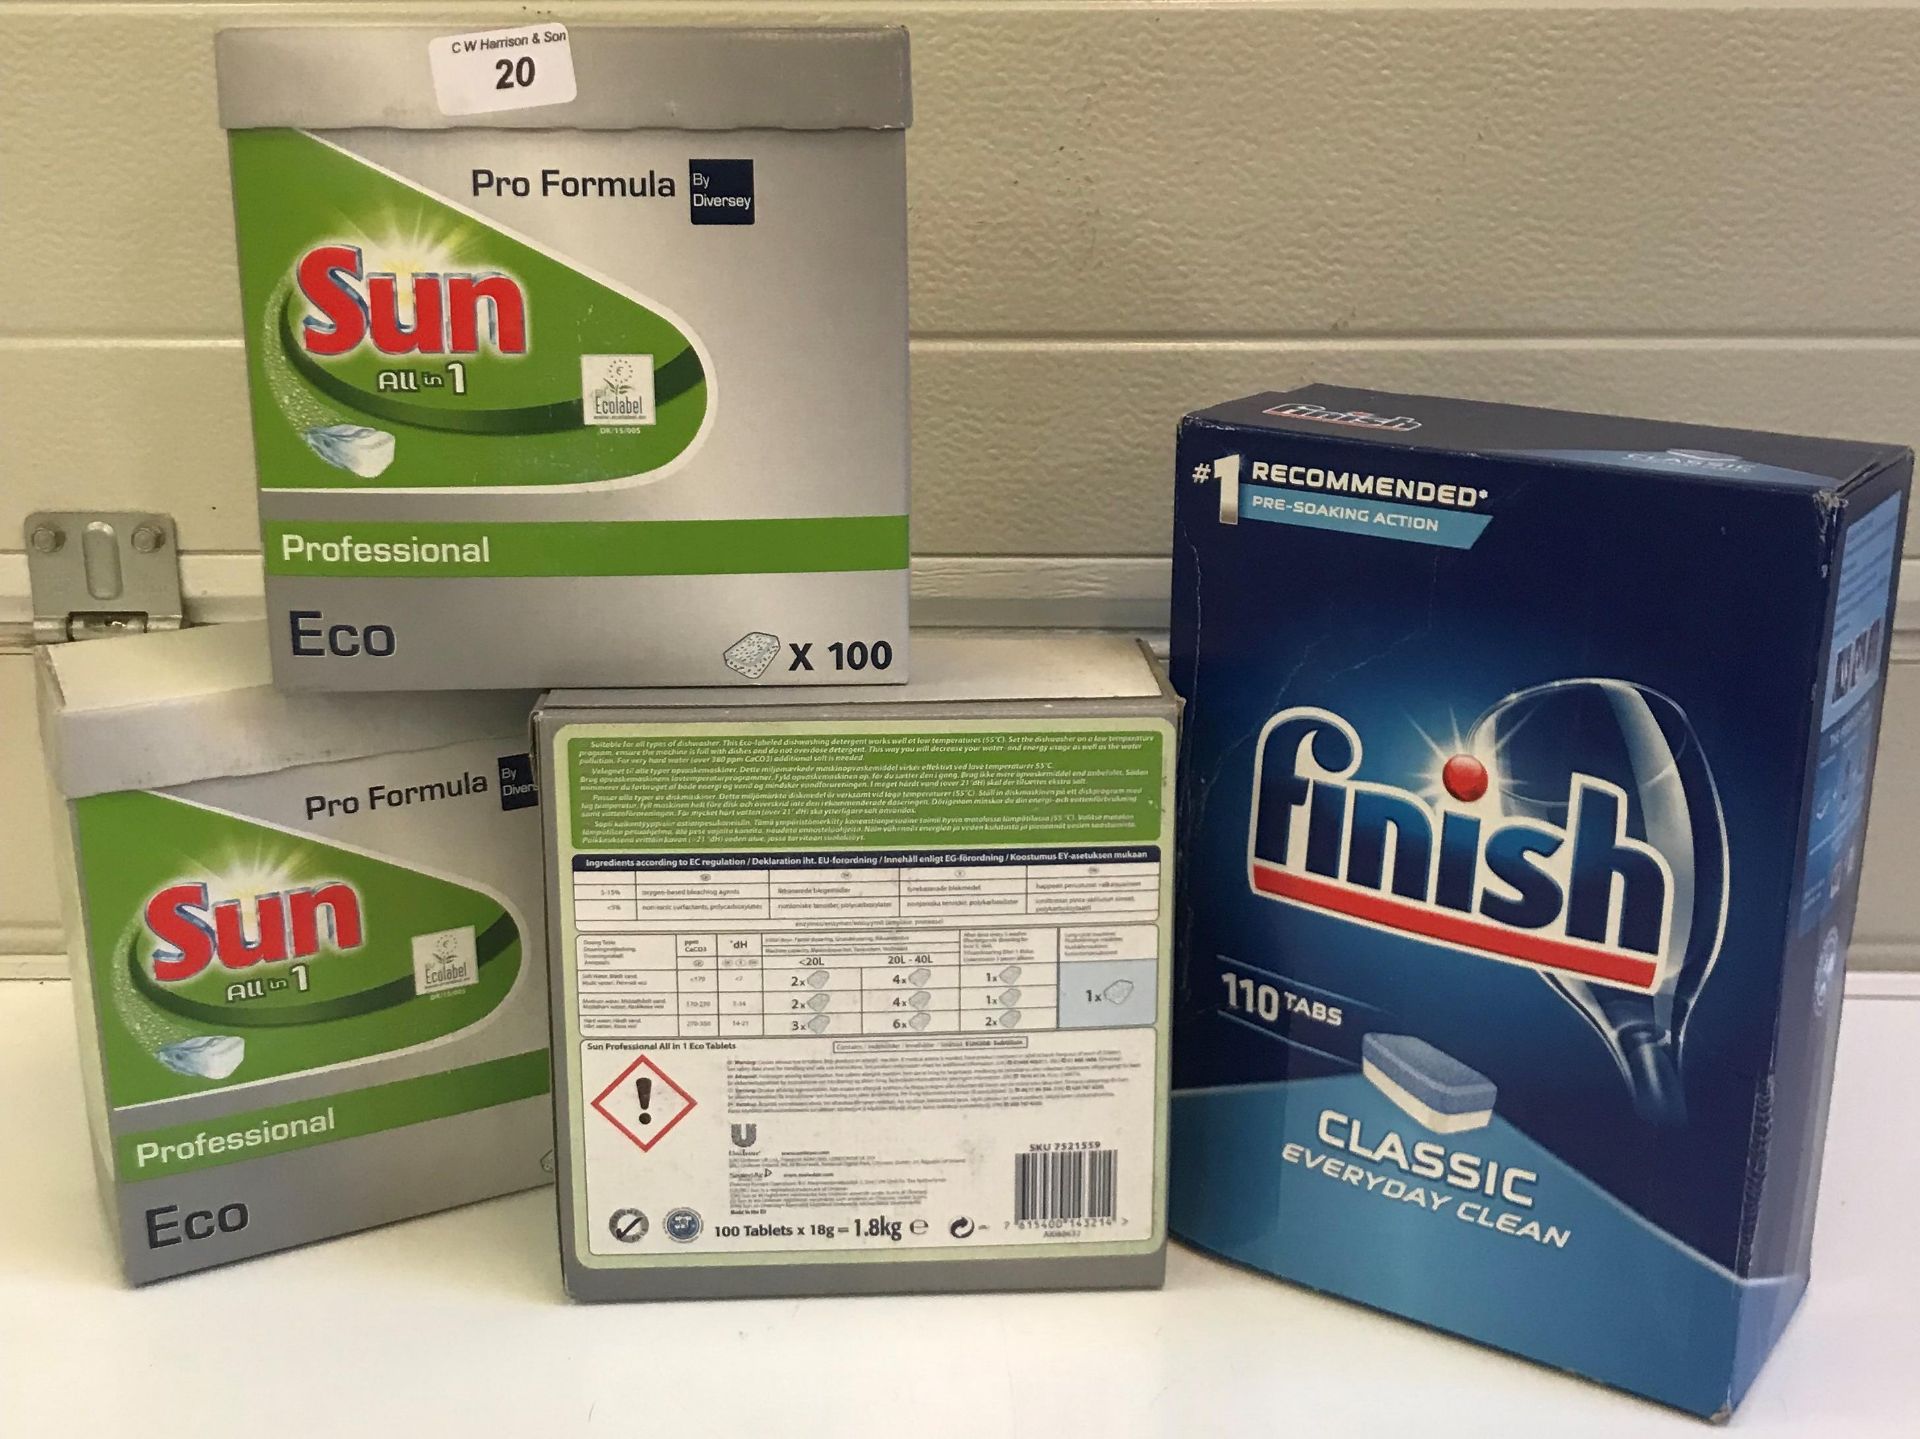 3 x boxes of 100 Diversey Pro Formula Sun all in 1 professional Eco dishwasher tablets and 1 x box